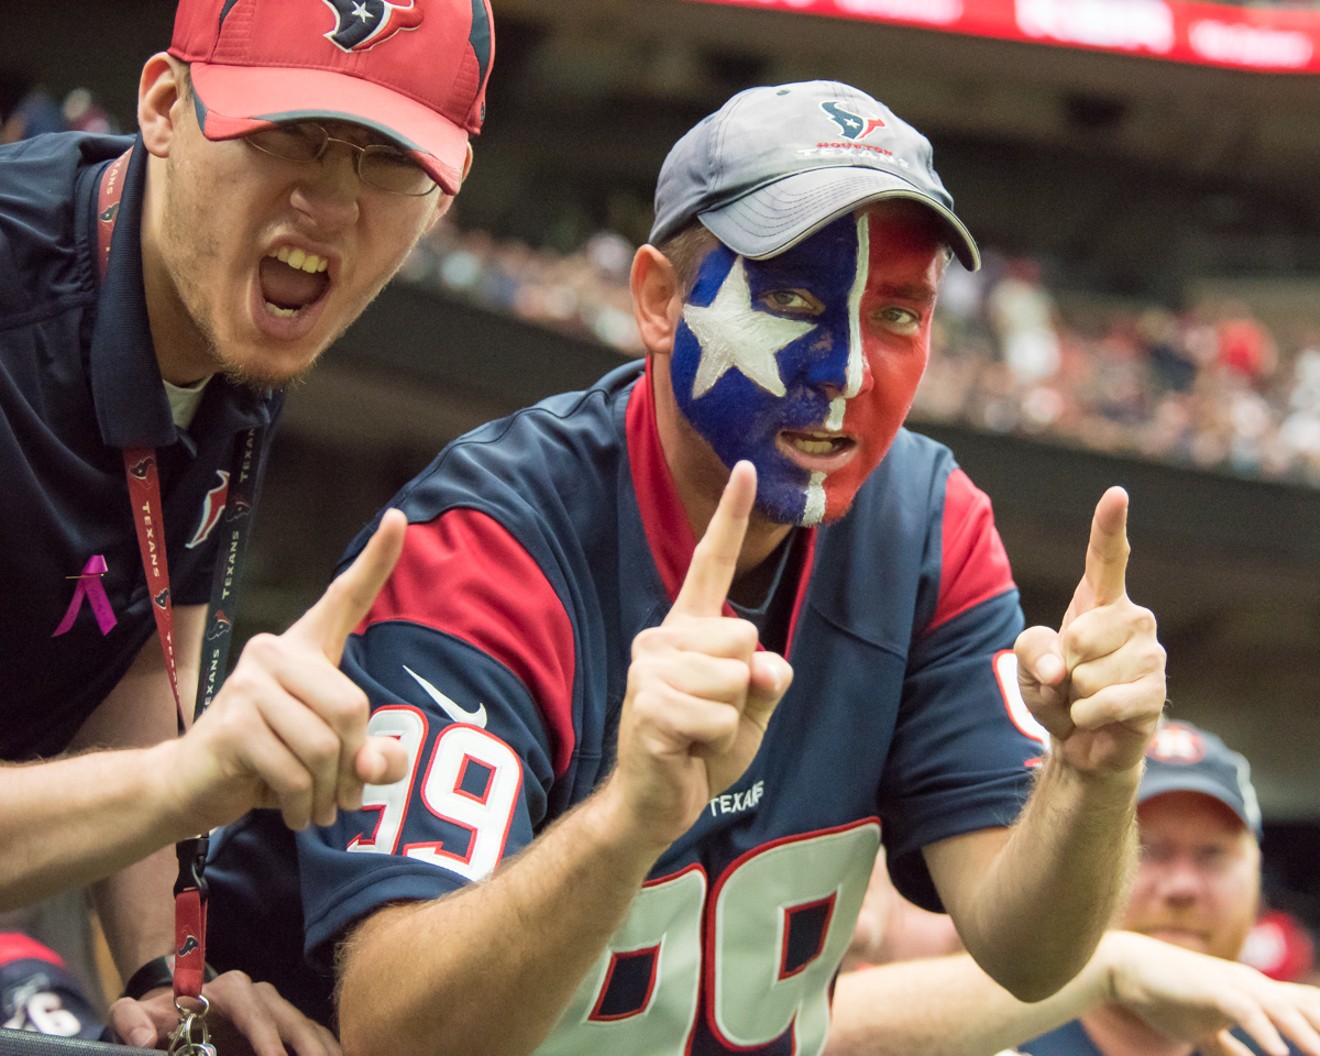 Traveling Texan fans have some great opportunities to see some pretty cool cities this season.